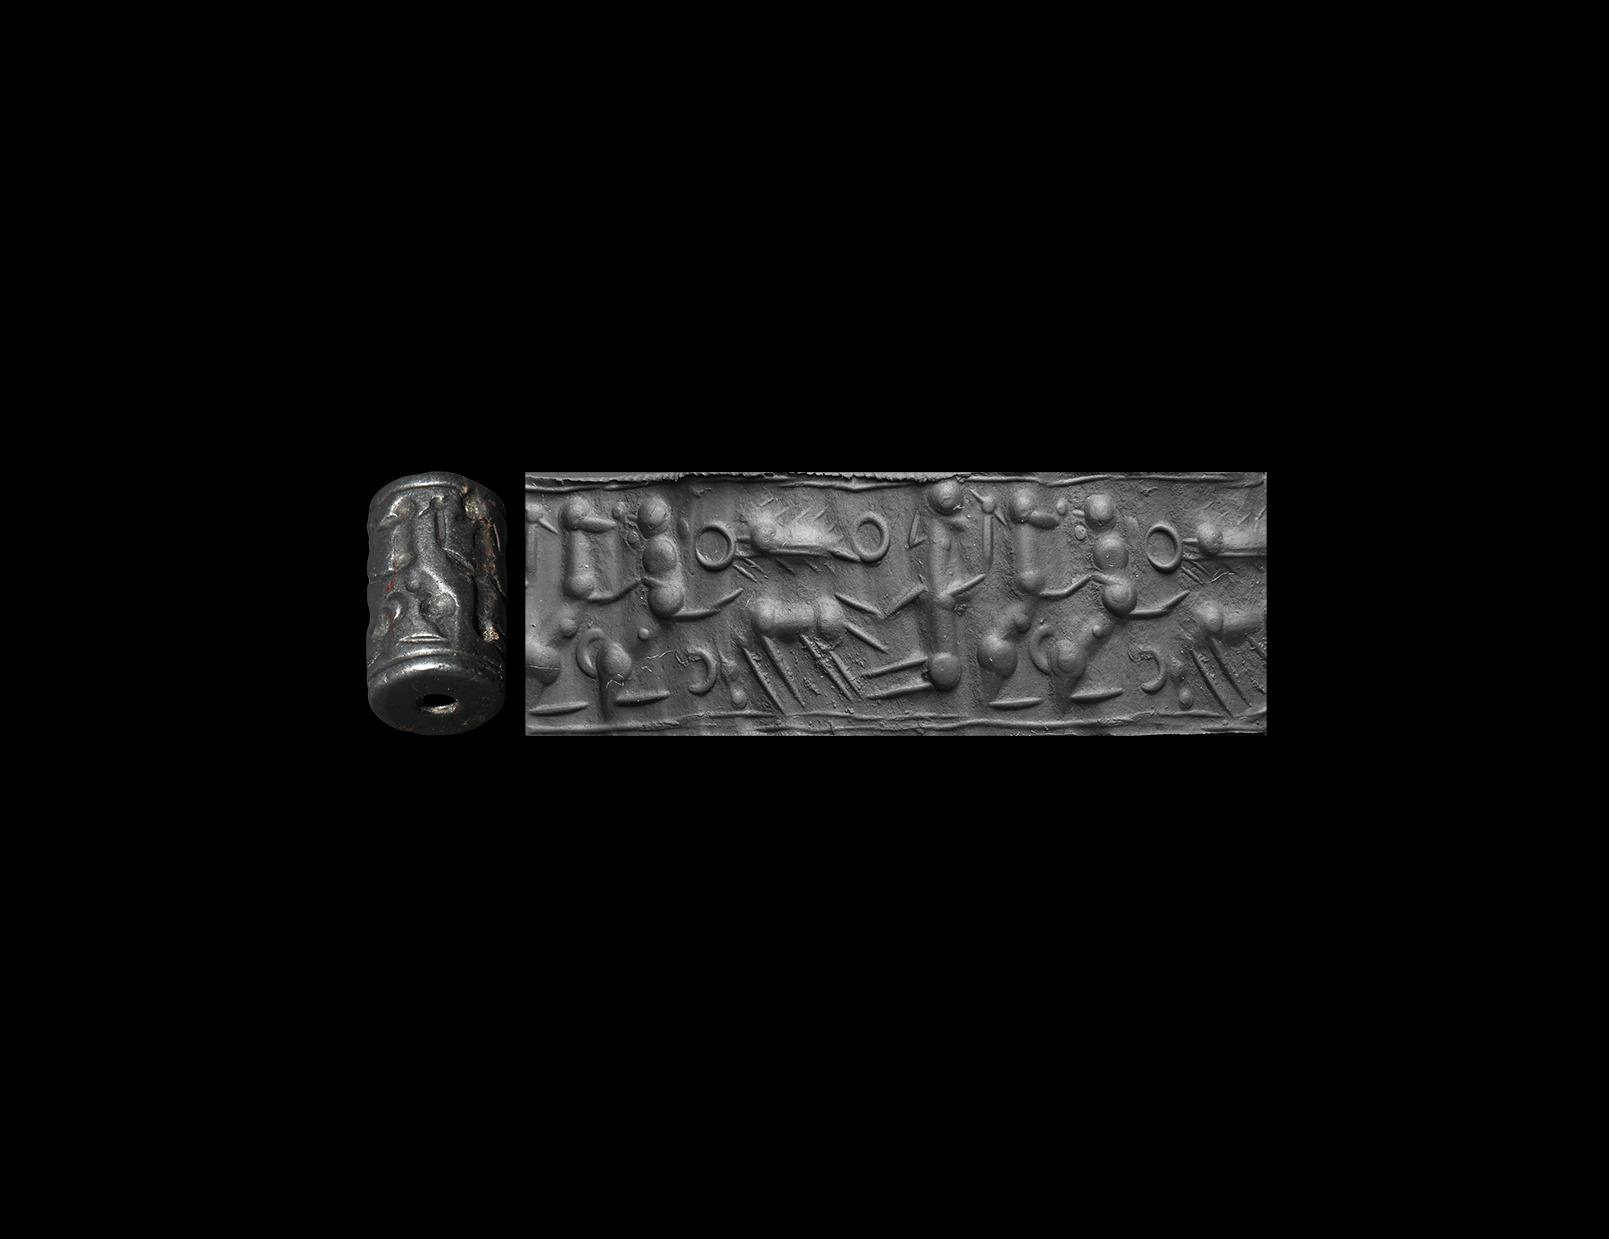 Cylinder Seal with Animal Design